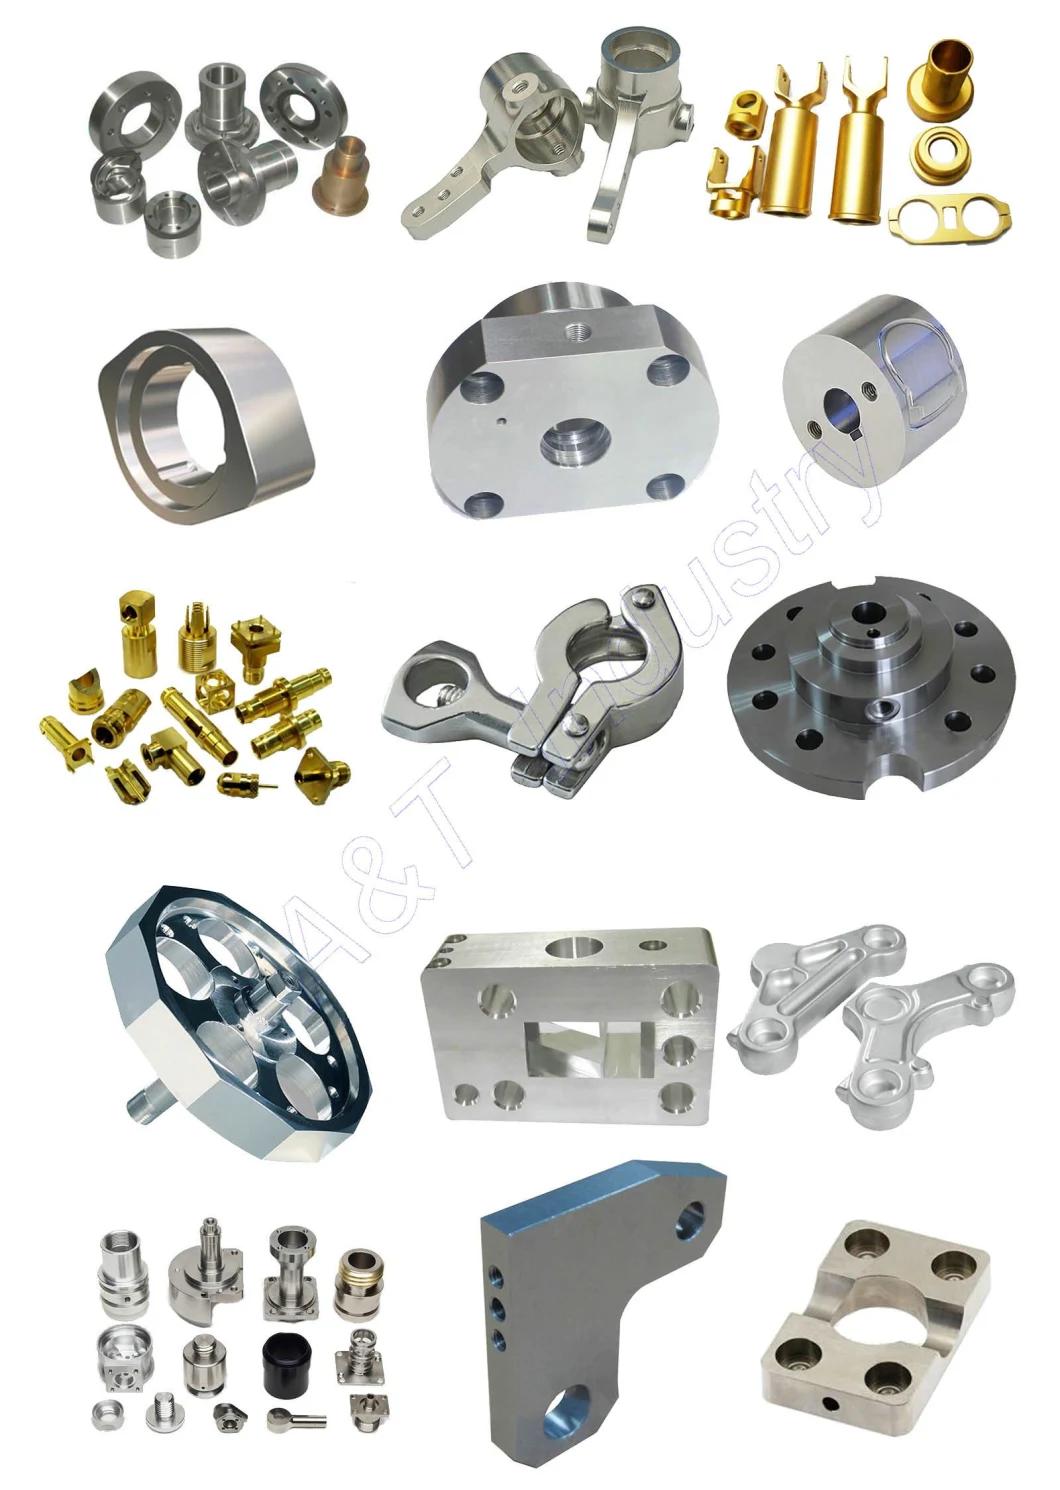 China 13 Years High Precision Zinc-Based Alloy Casting Manufacturer